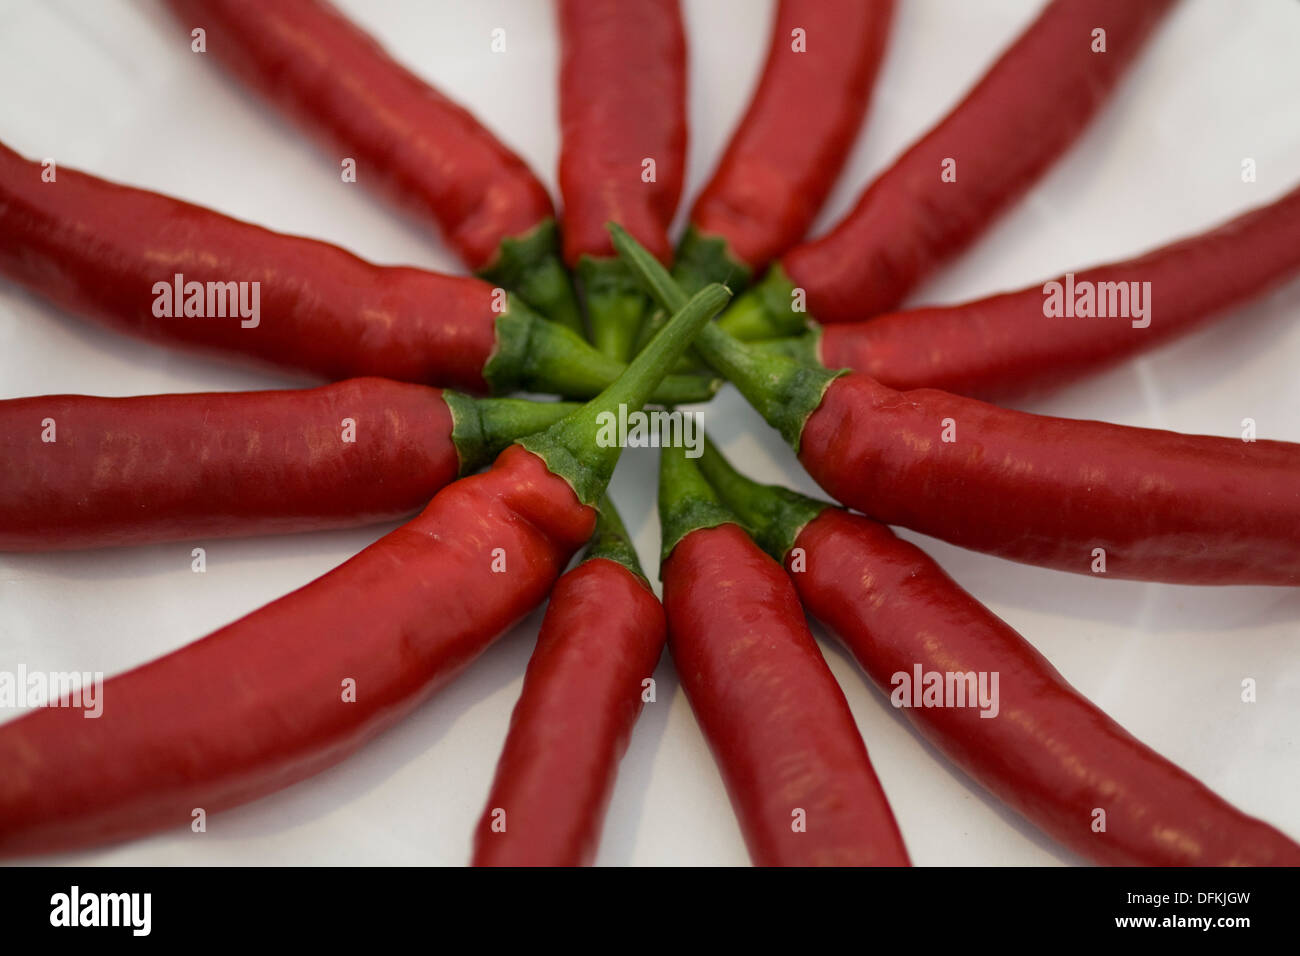 Capsicum annuum 'Ring of Fire' Chili Peppers on white Stock Photo